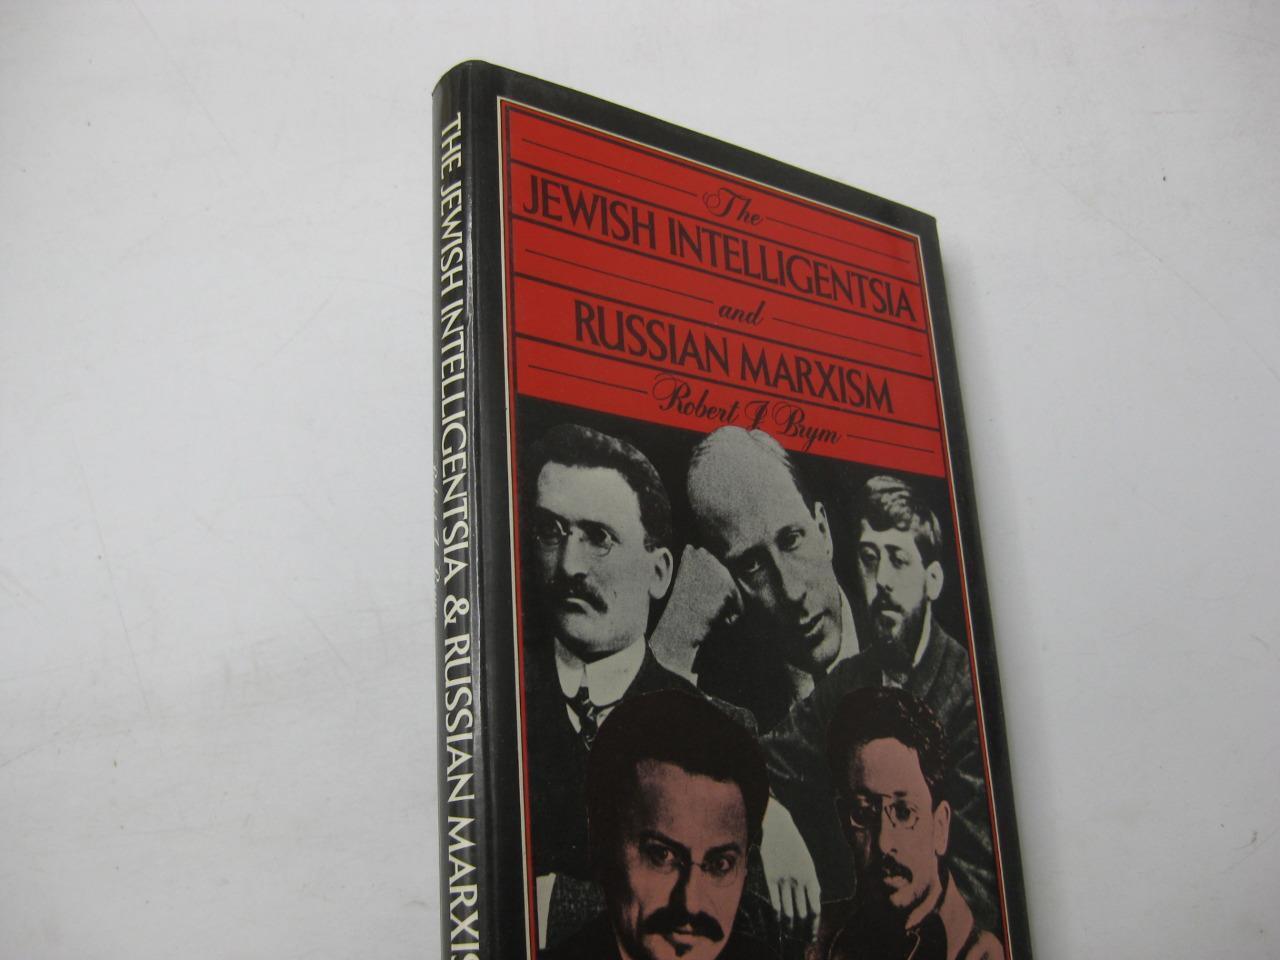 The Jewish intelligentsia and Russian Marxism: A sociological study of intellect